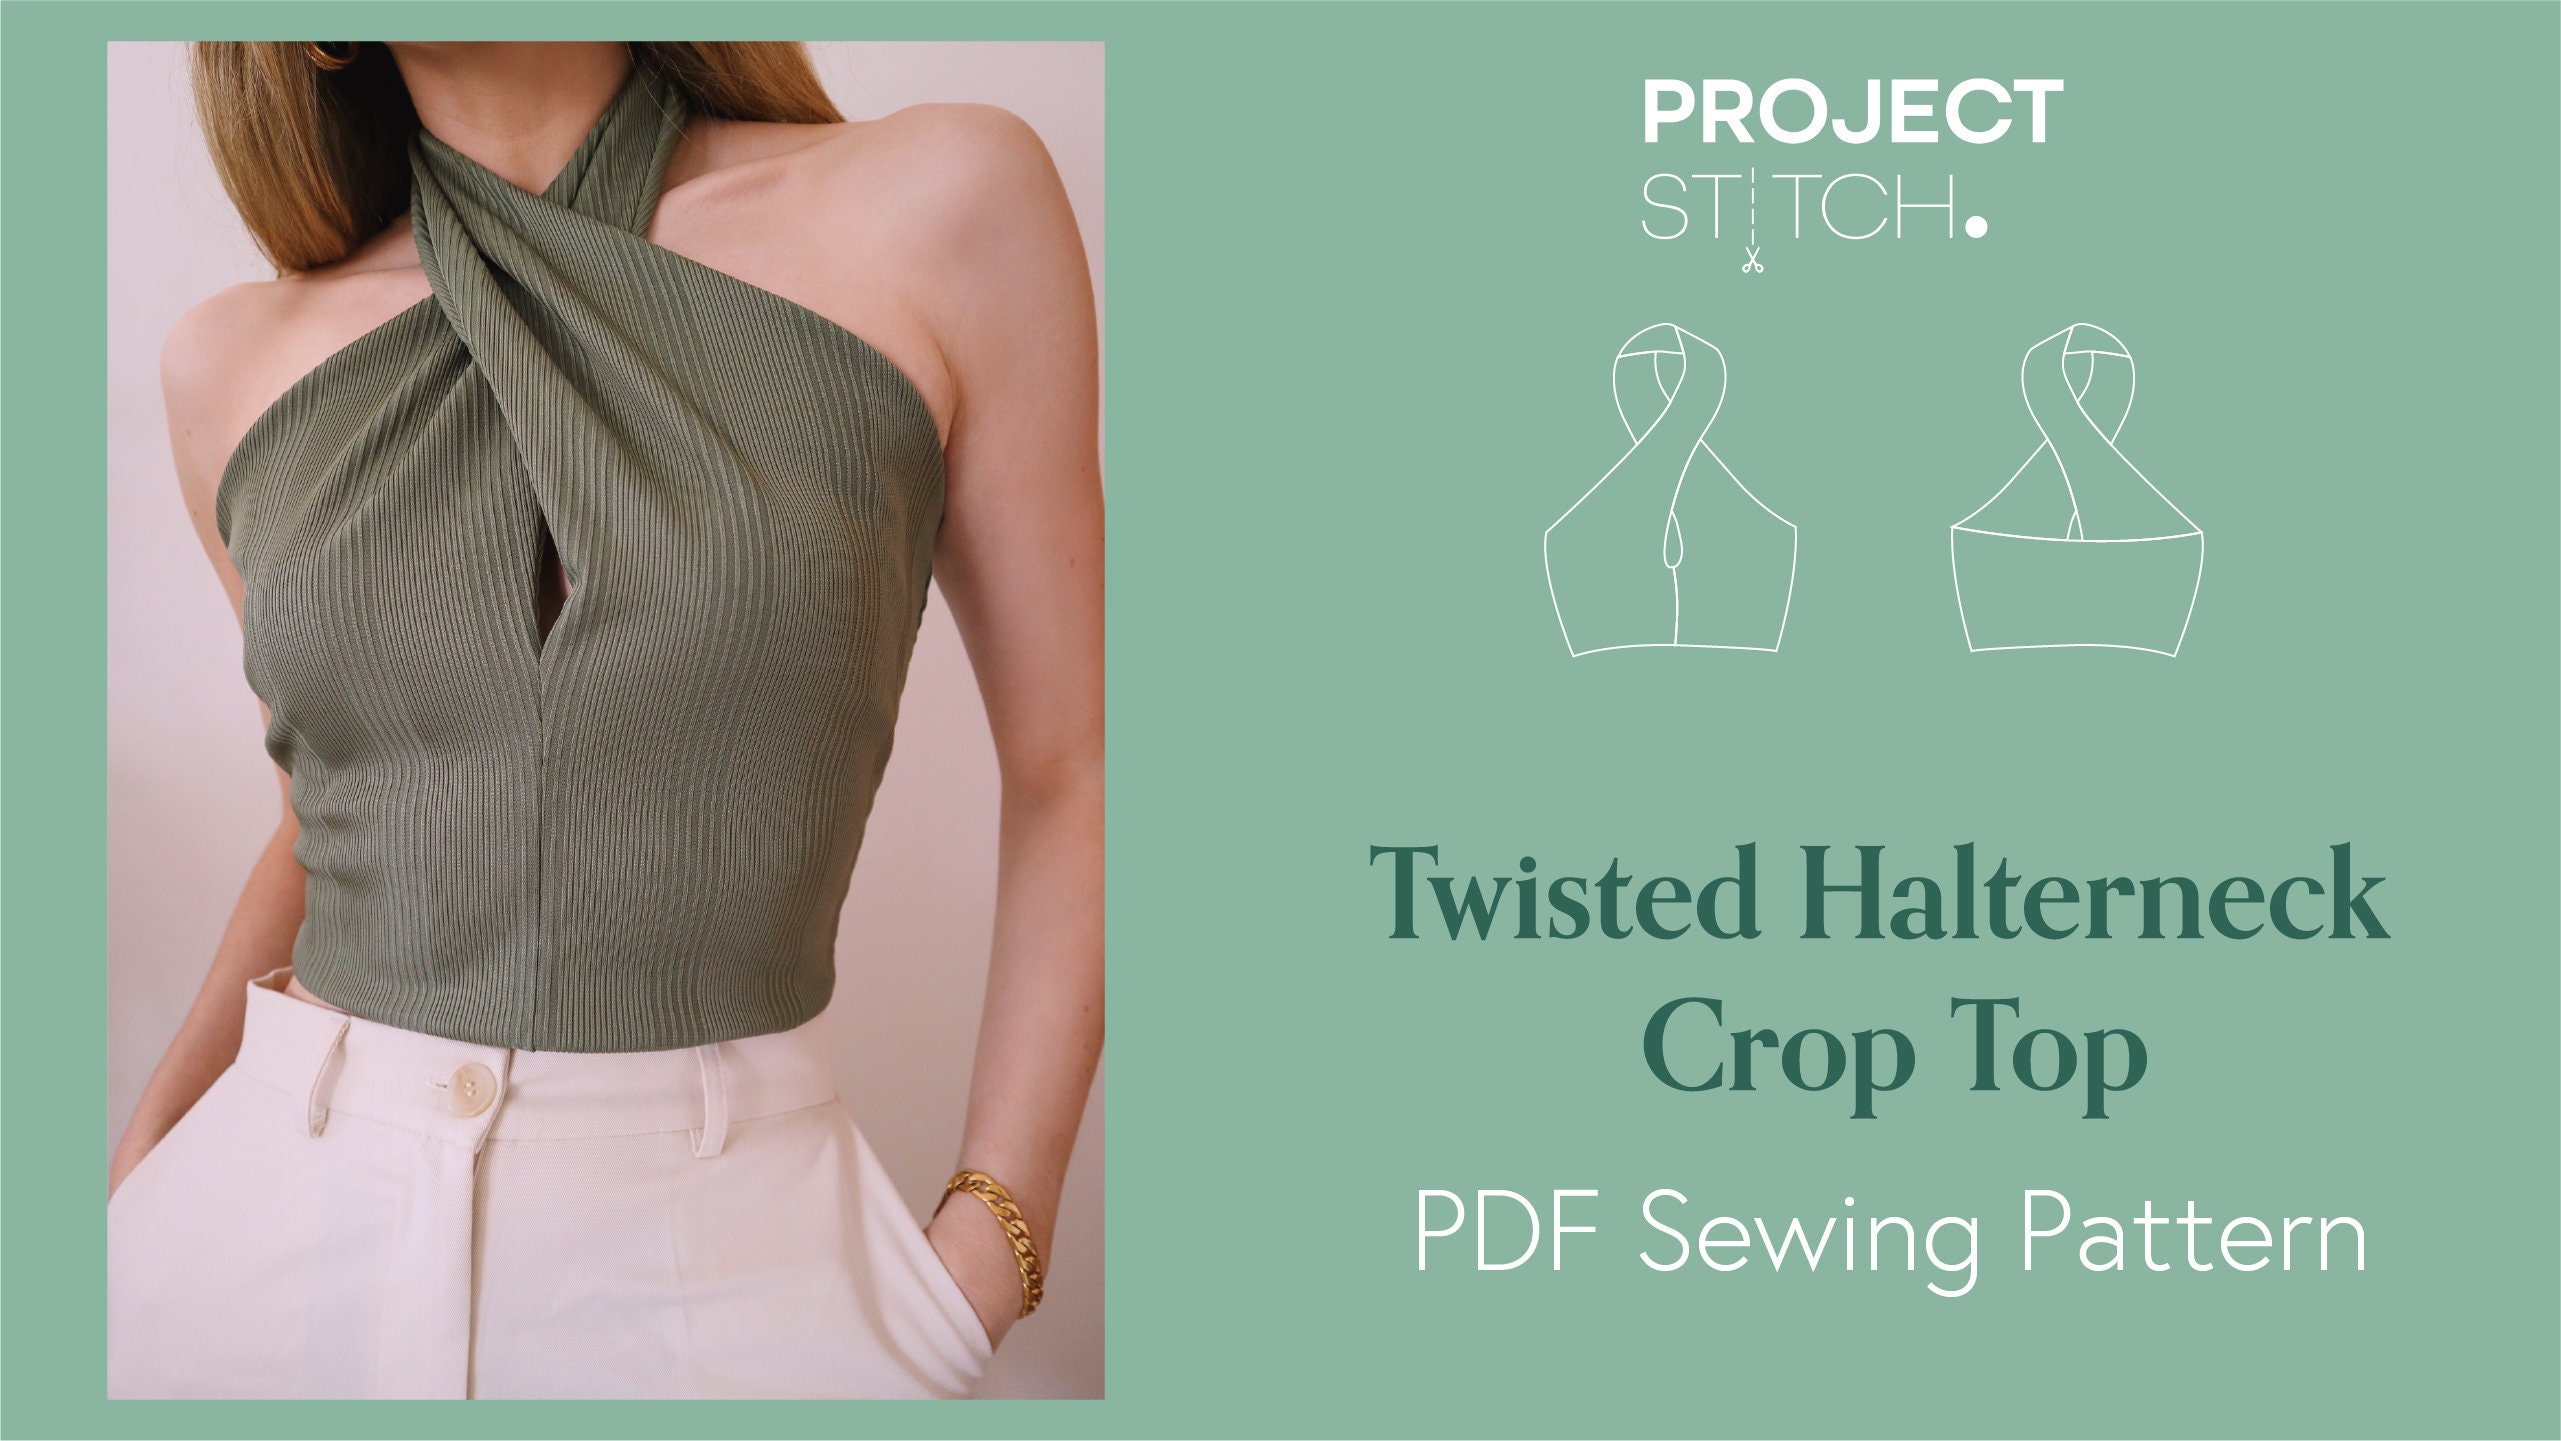 PDF Halter Crop Top Sewing Pattern Uk Size 4 18 US Size 0 14 Instant  Download Print at Home A4, US Letter -  Canada